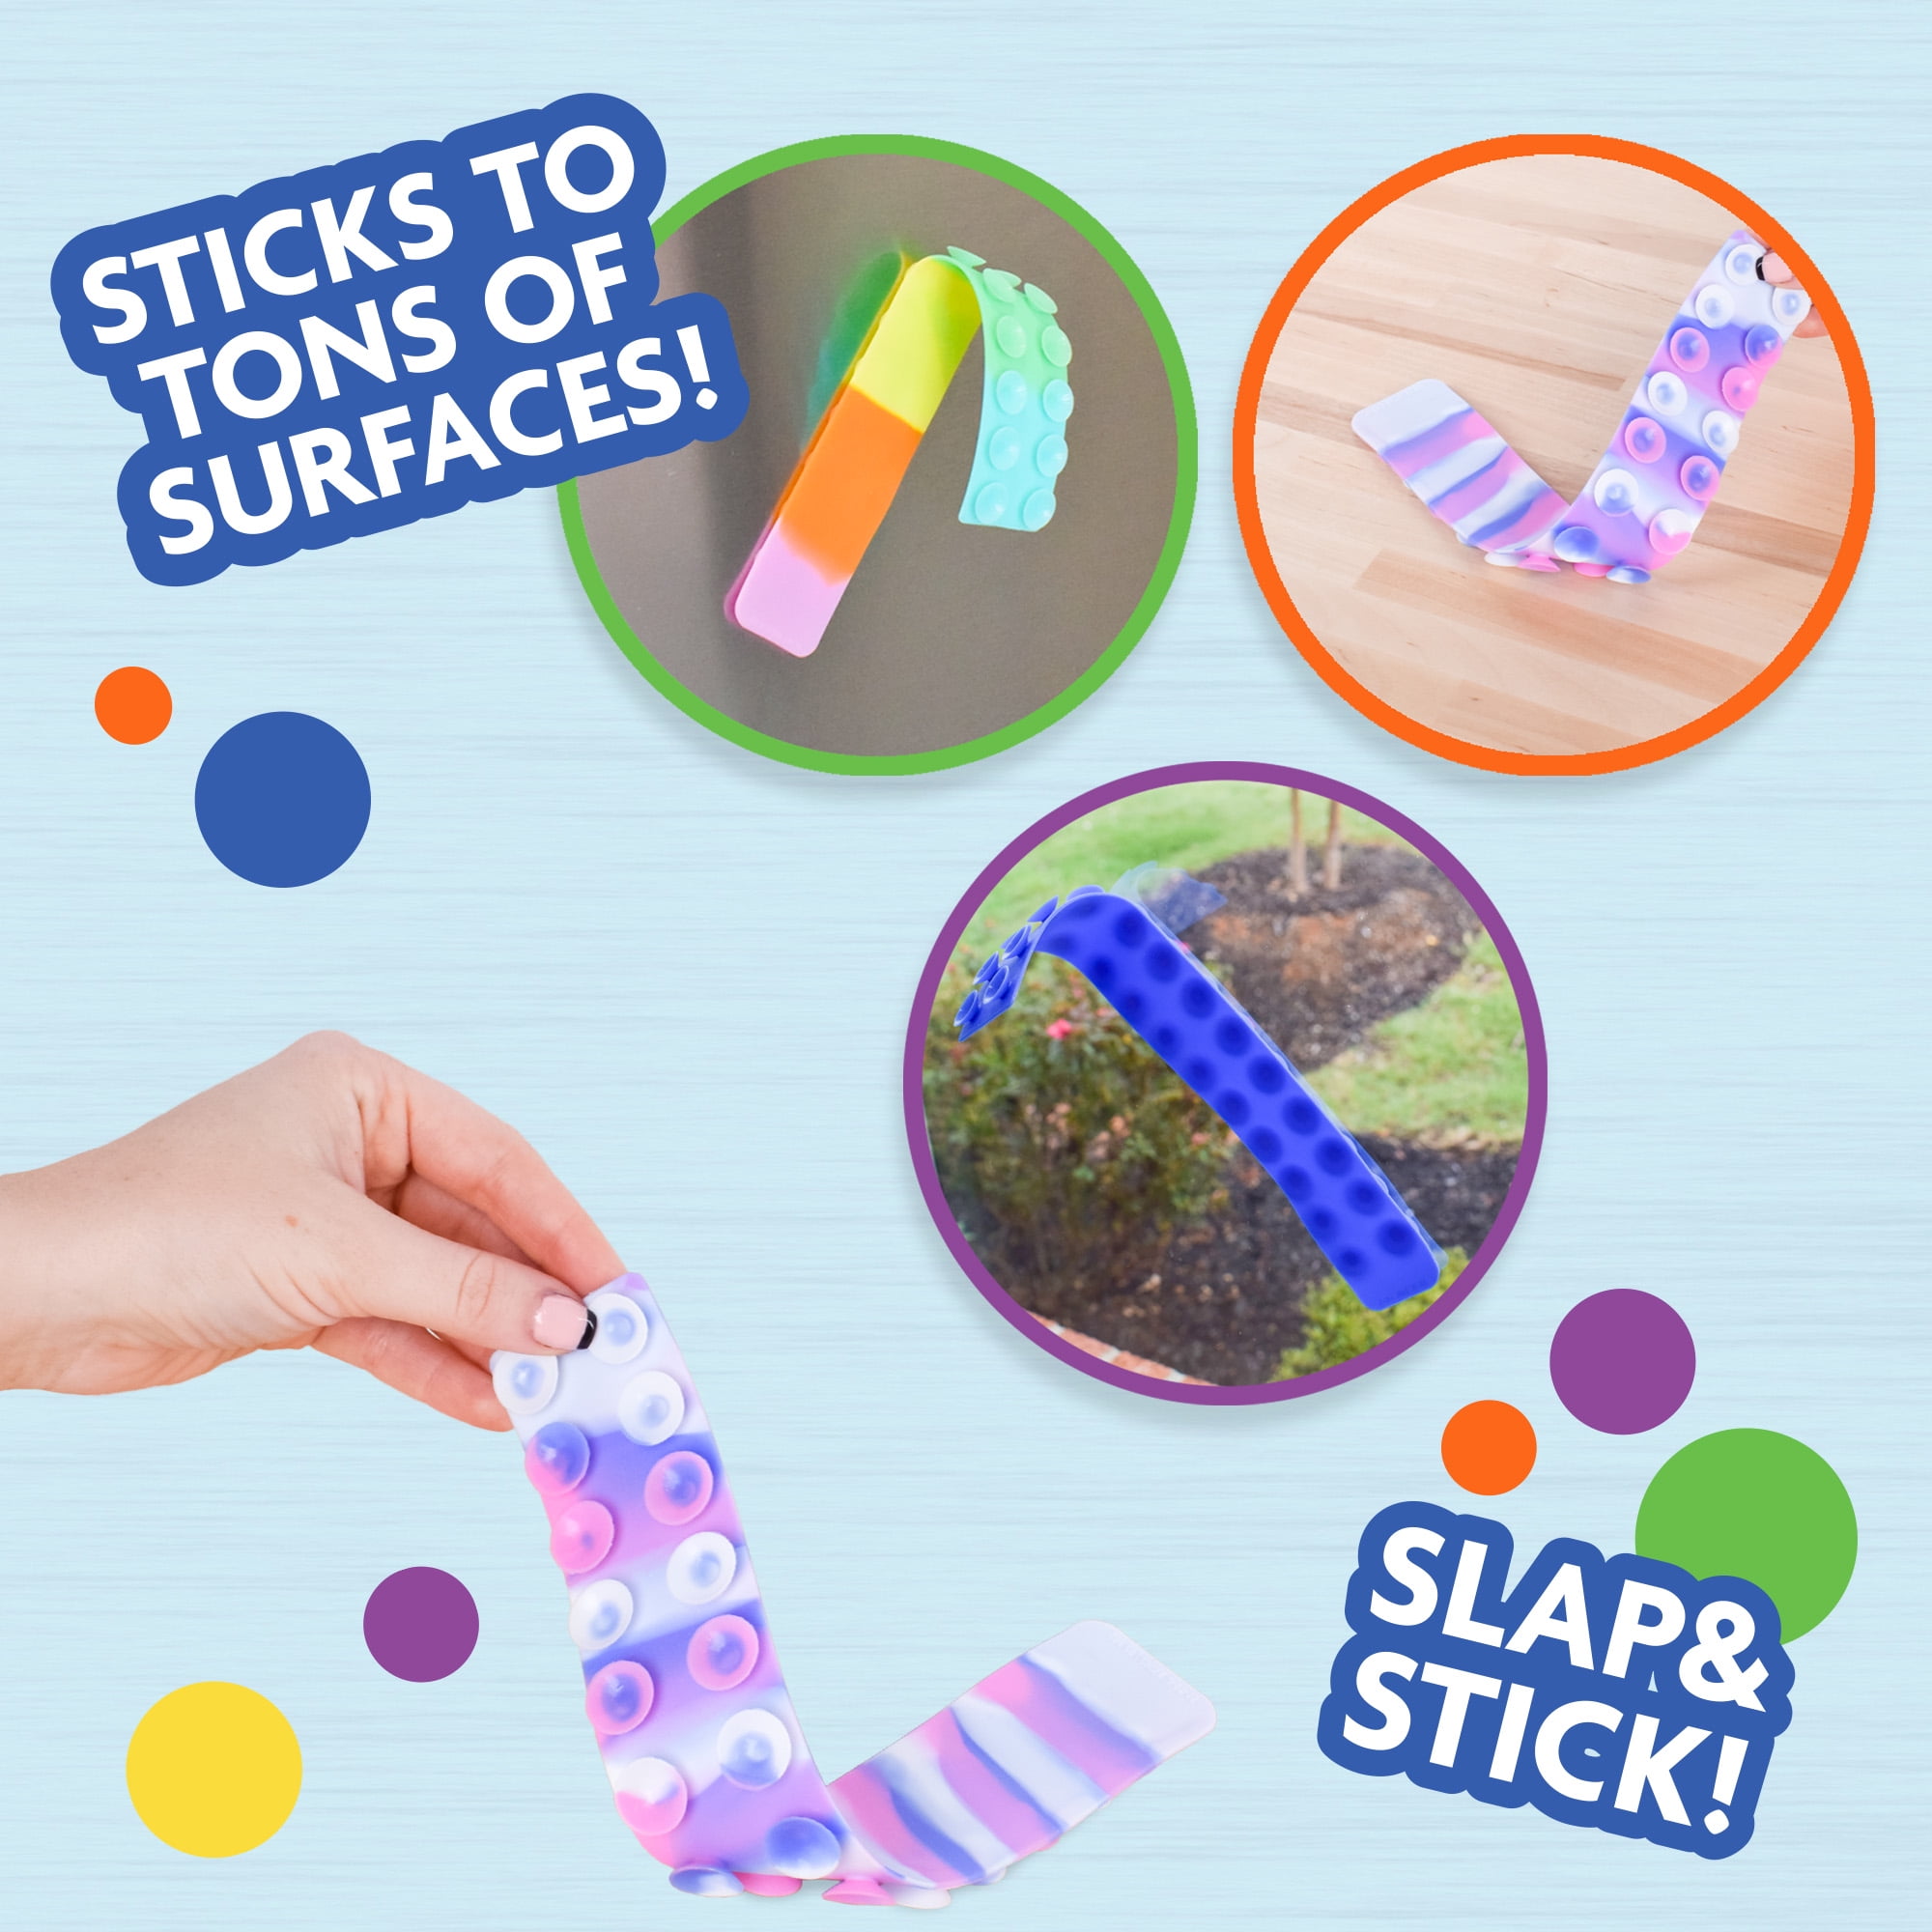 48PCS Tie Dye Party Favors Slap, Colorful Wristbands for Kids Classroom  Gifts Exchanging,Gift Box Filler,Birthday Party Decorations Supplies,  Christmas Gifts